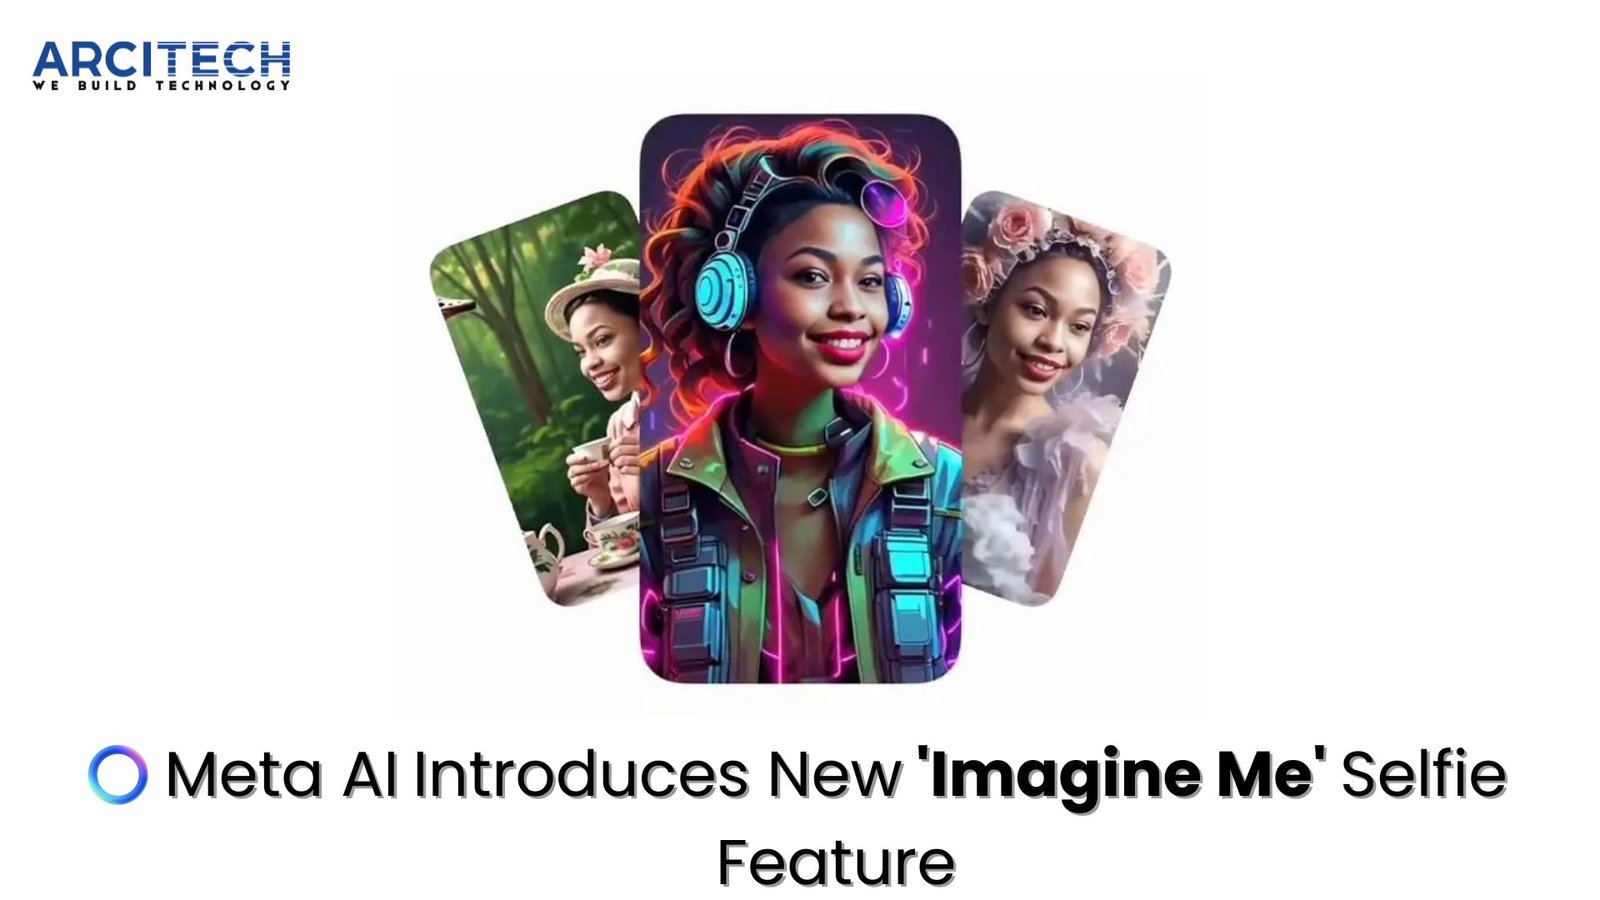 Meta AI Introduces New 'Imagine Me' Selfie Feature - Showcasing three stylized selfies of a woman in different imaginative scenarios, highlighting Meta AI's innovative new tool for creating personalized and creative selfies.